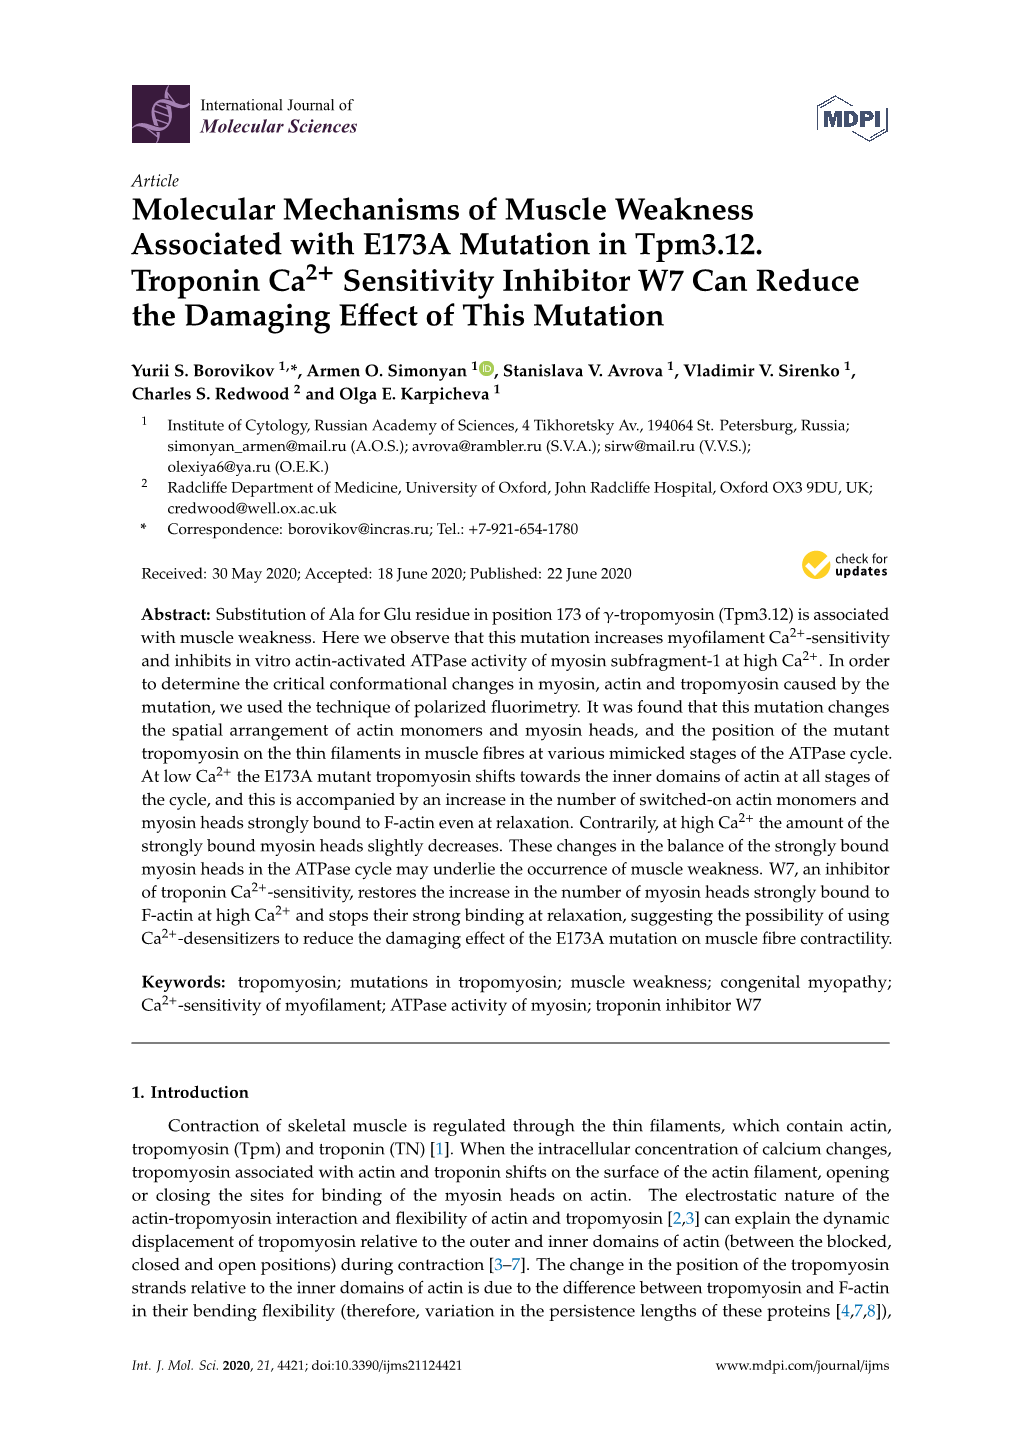 Molecular Mechanisms of Muscle Weakness Associated with E173A Mutation in Tpm3.12